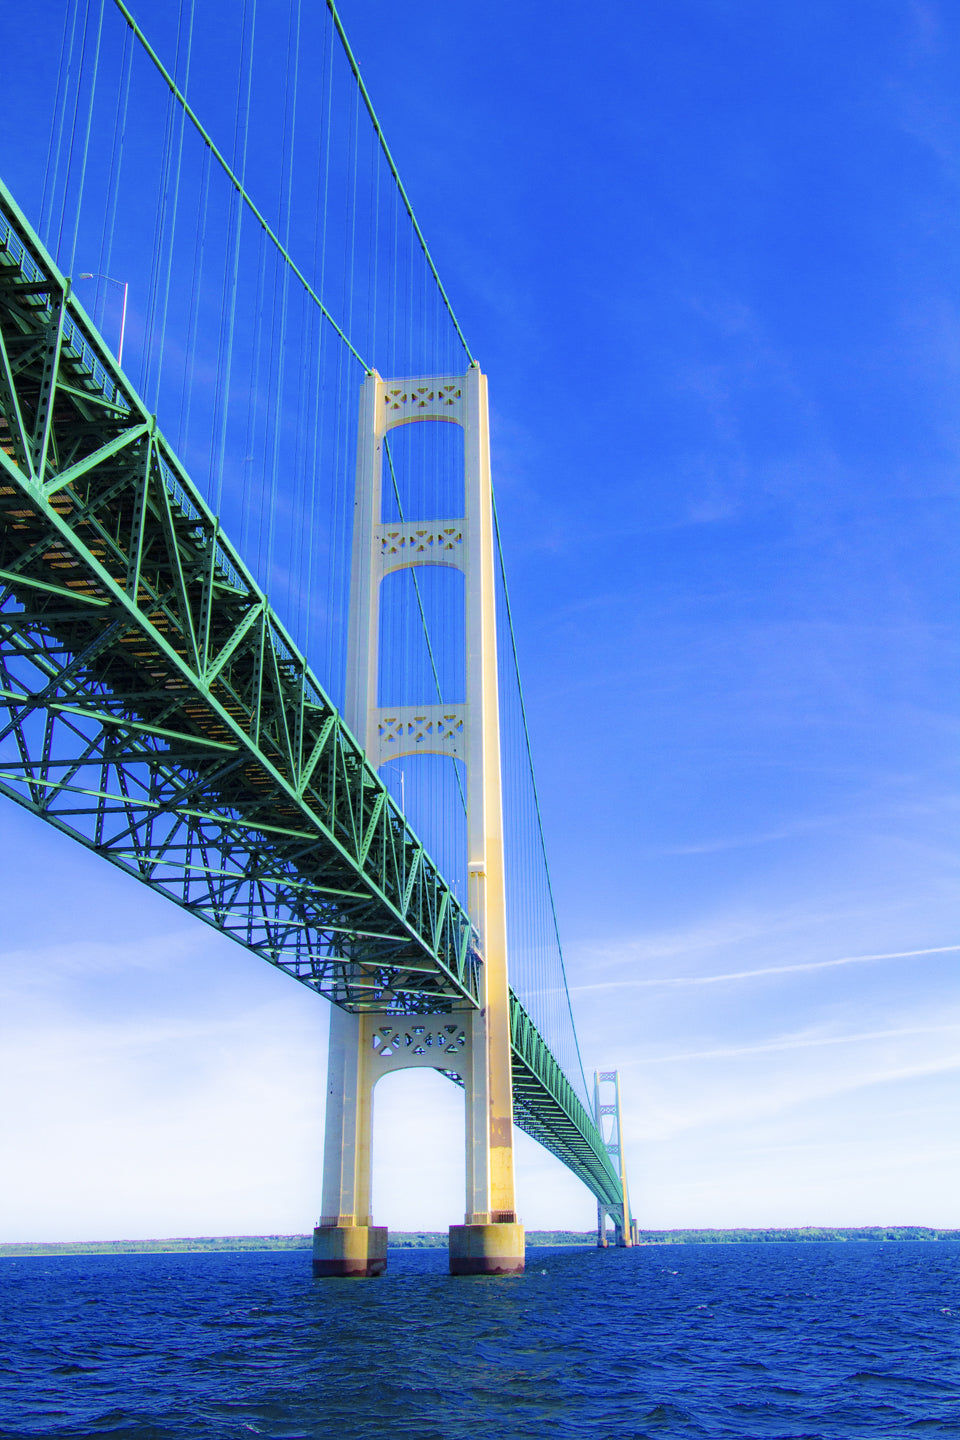 The Mighty Mac photograph by Jennifer Wohletz of Mackinac Memories.